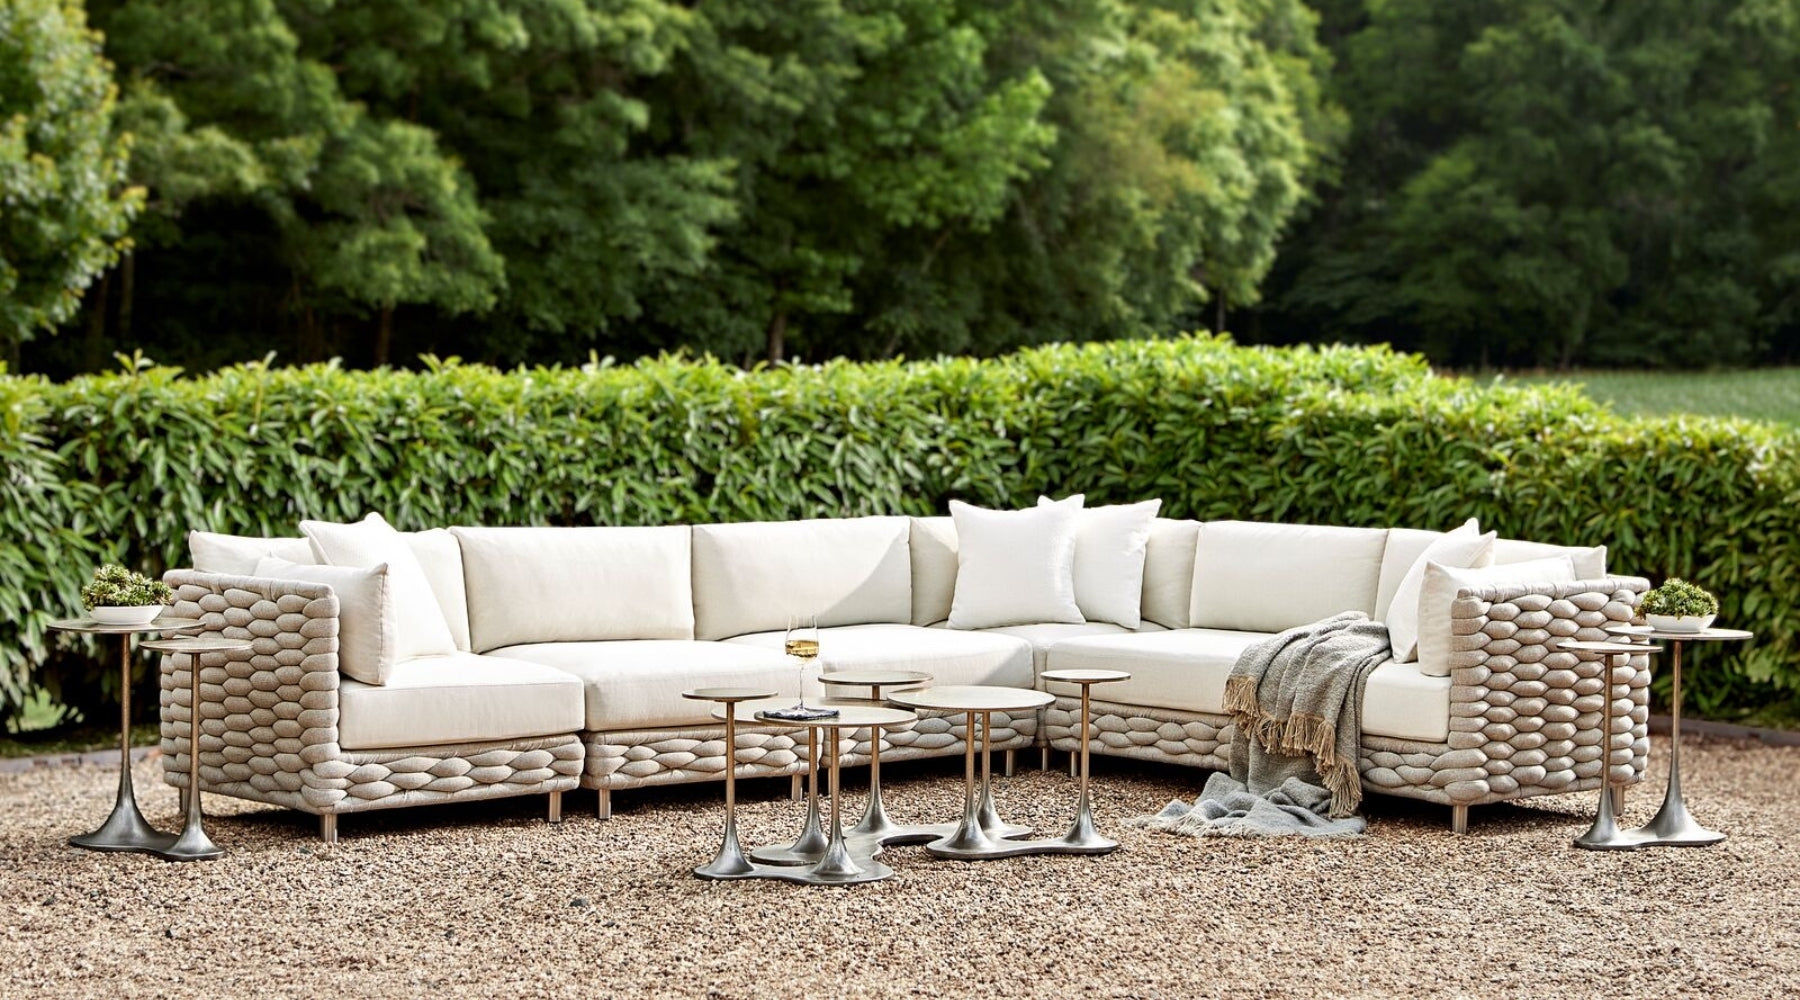 Outdoor luxury seating area with a large L-shaped off-white sectional sofa, adorned with matching cushions. The sofa features unique pebble-like detailing on the sides. Set on a pebbled patio, the setup includes sleek, modern metal side tables of varying heights, with a glass of white wine on one and small potted plants on others. The area is framed by a lush green hedge, emphasizing the serene and manicured garden ambiance.